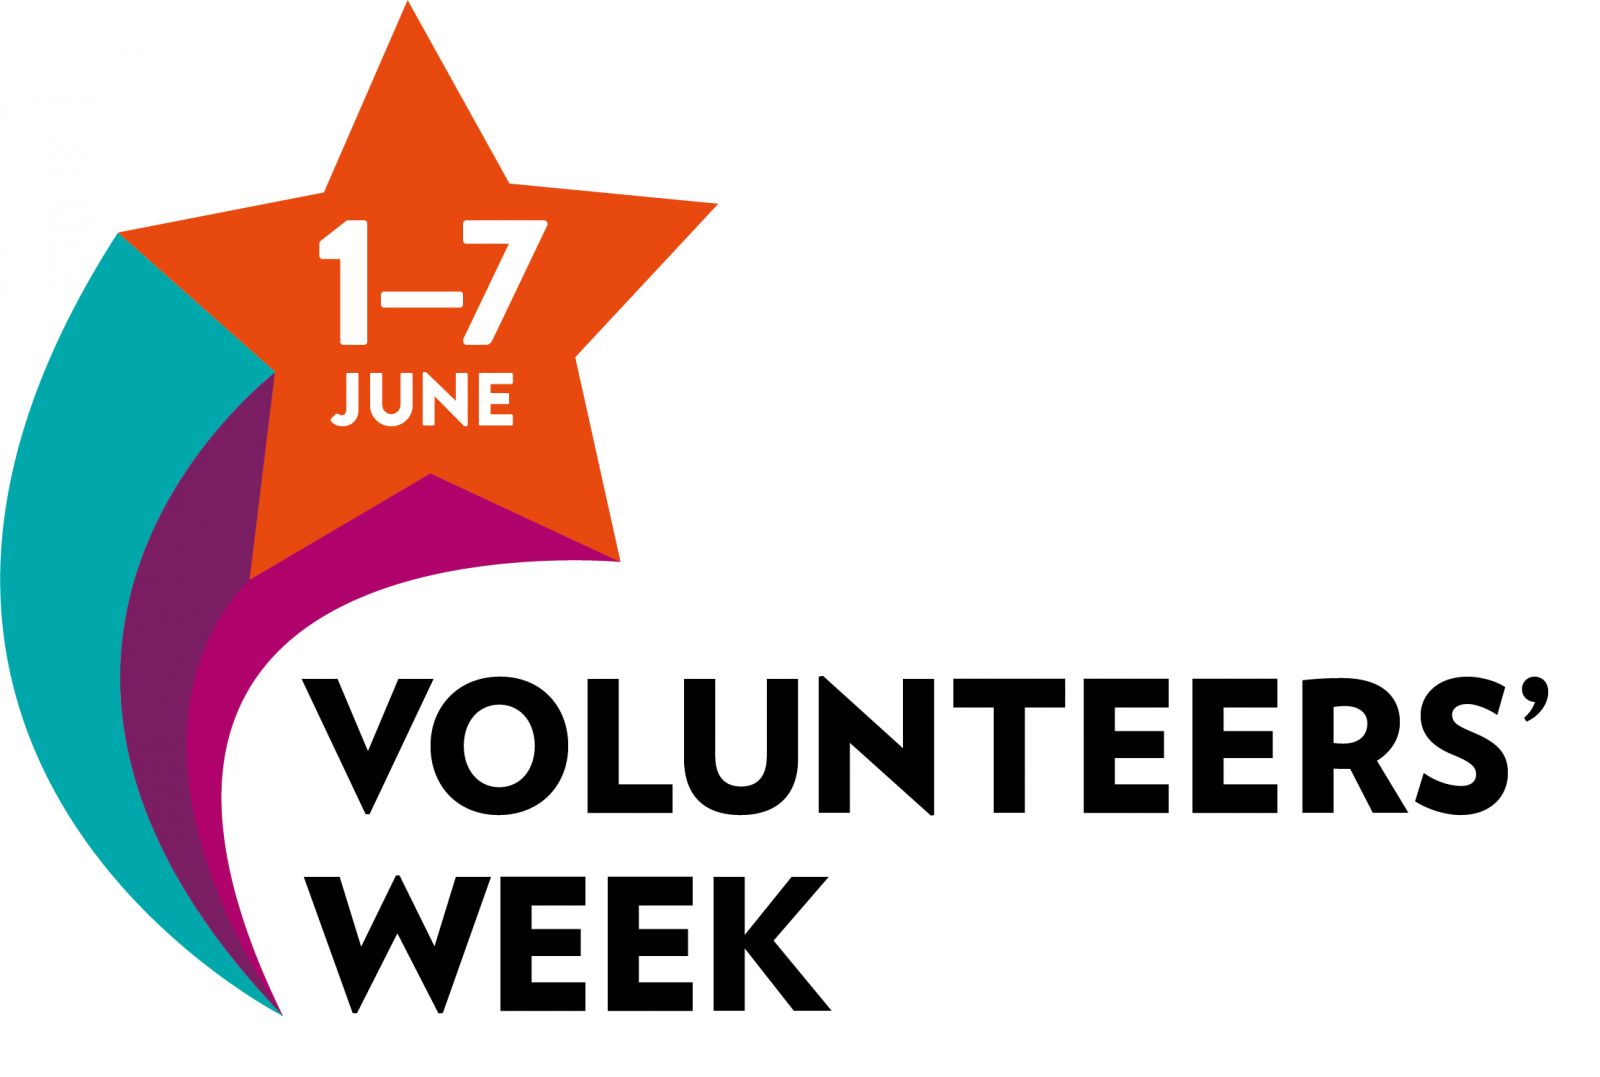 A huge thank you to all our wonderful volunteers who help in so many ways 